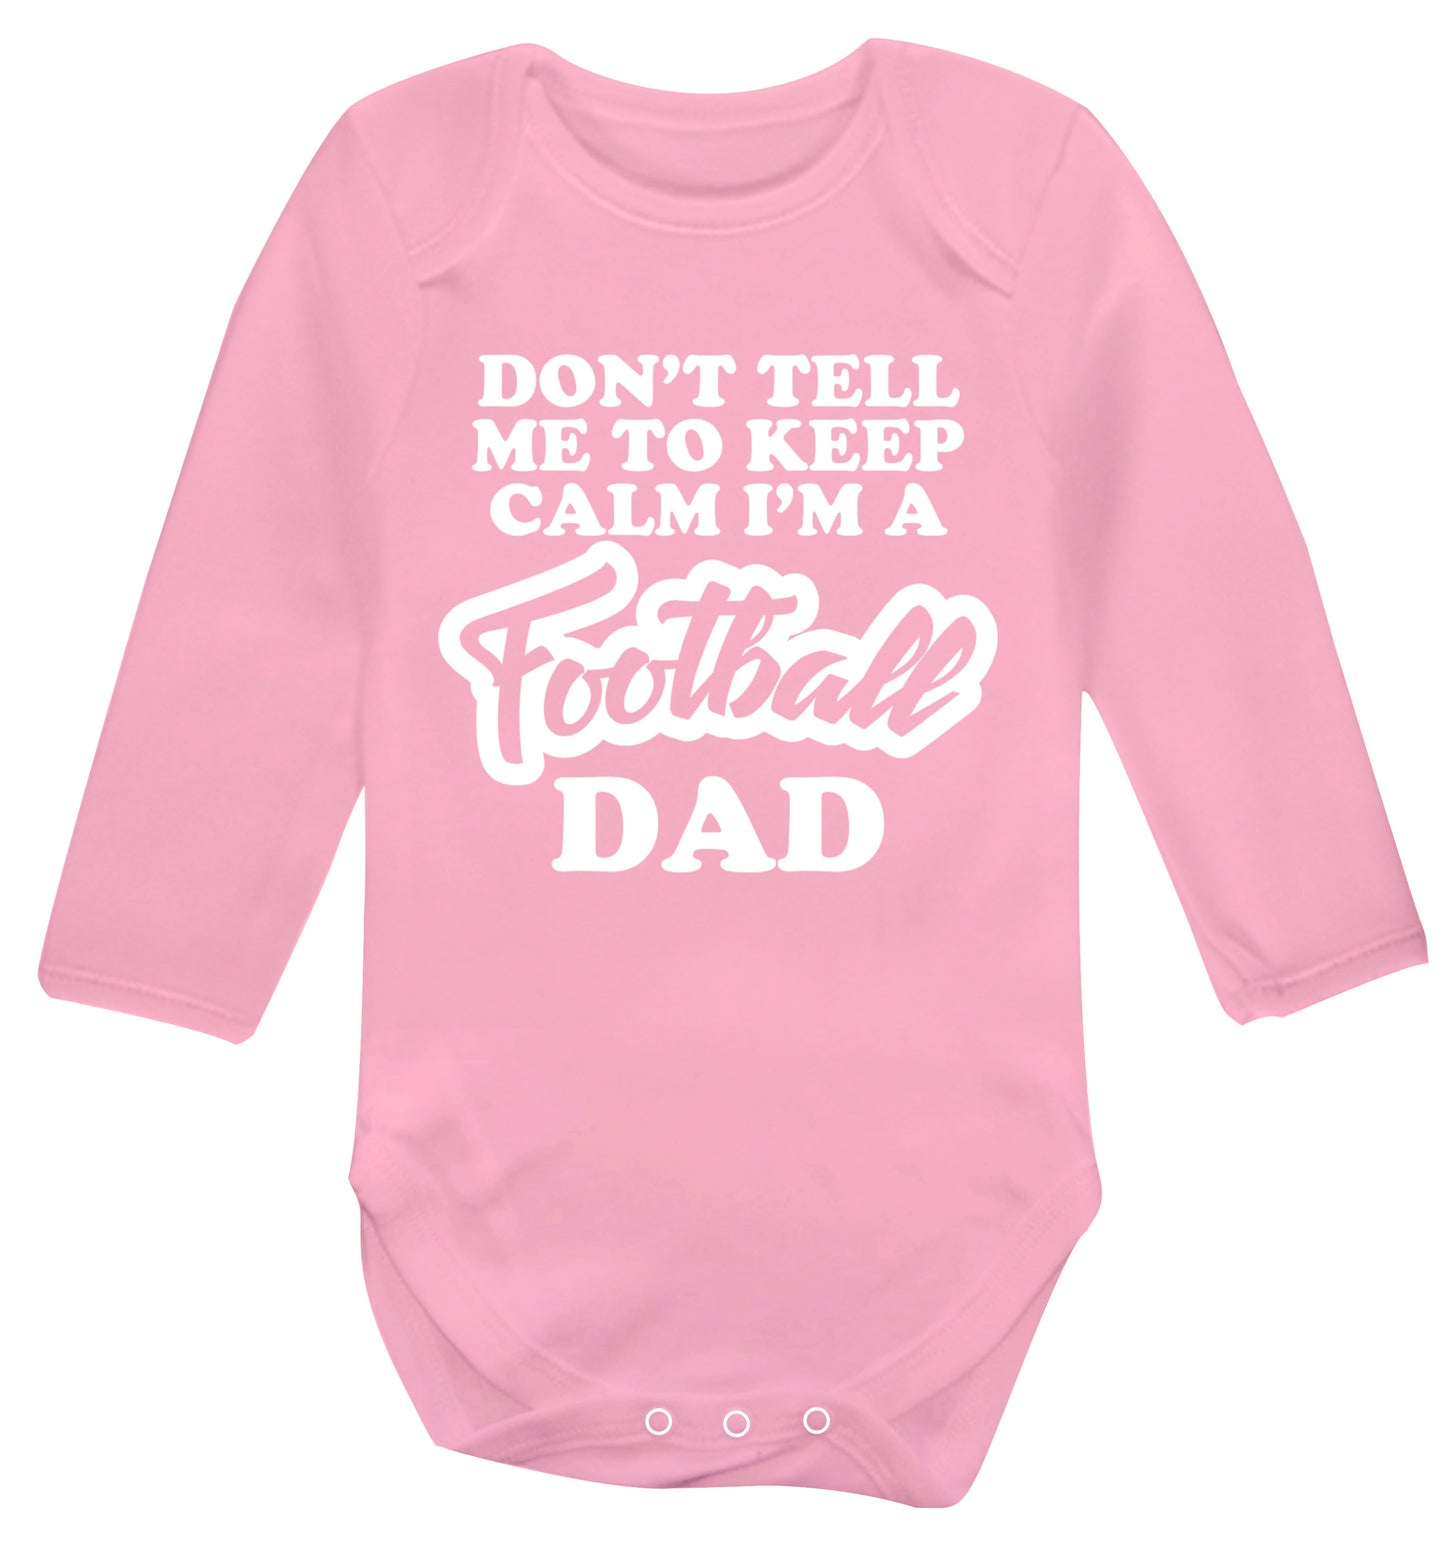 Don't tell me to keep calm I'm a football dad Baby Vest long sleeved pale pink 6-12 months